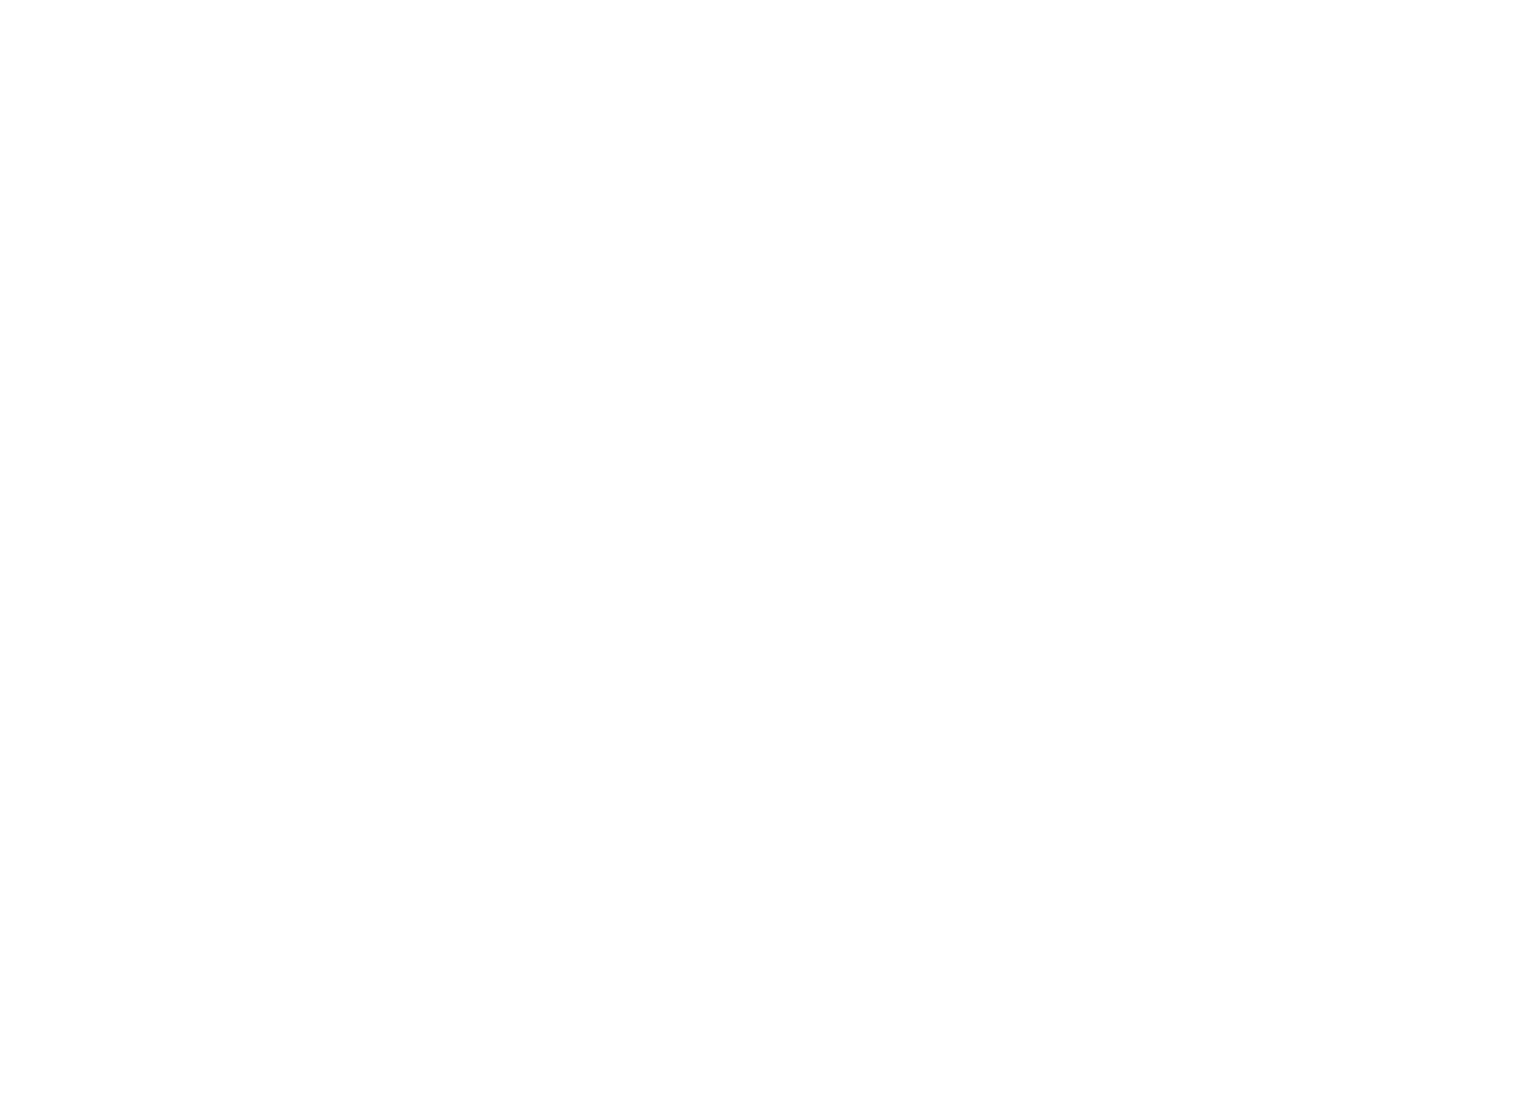 Relativity Space logo for dark backgrounds (transparent PNG)